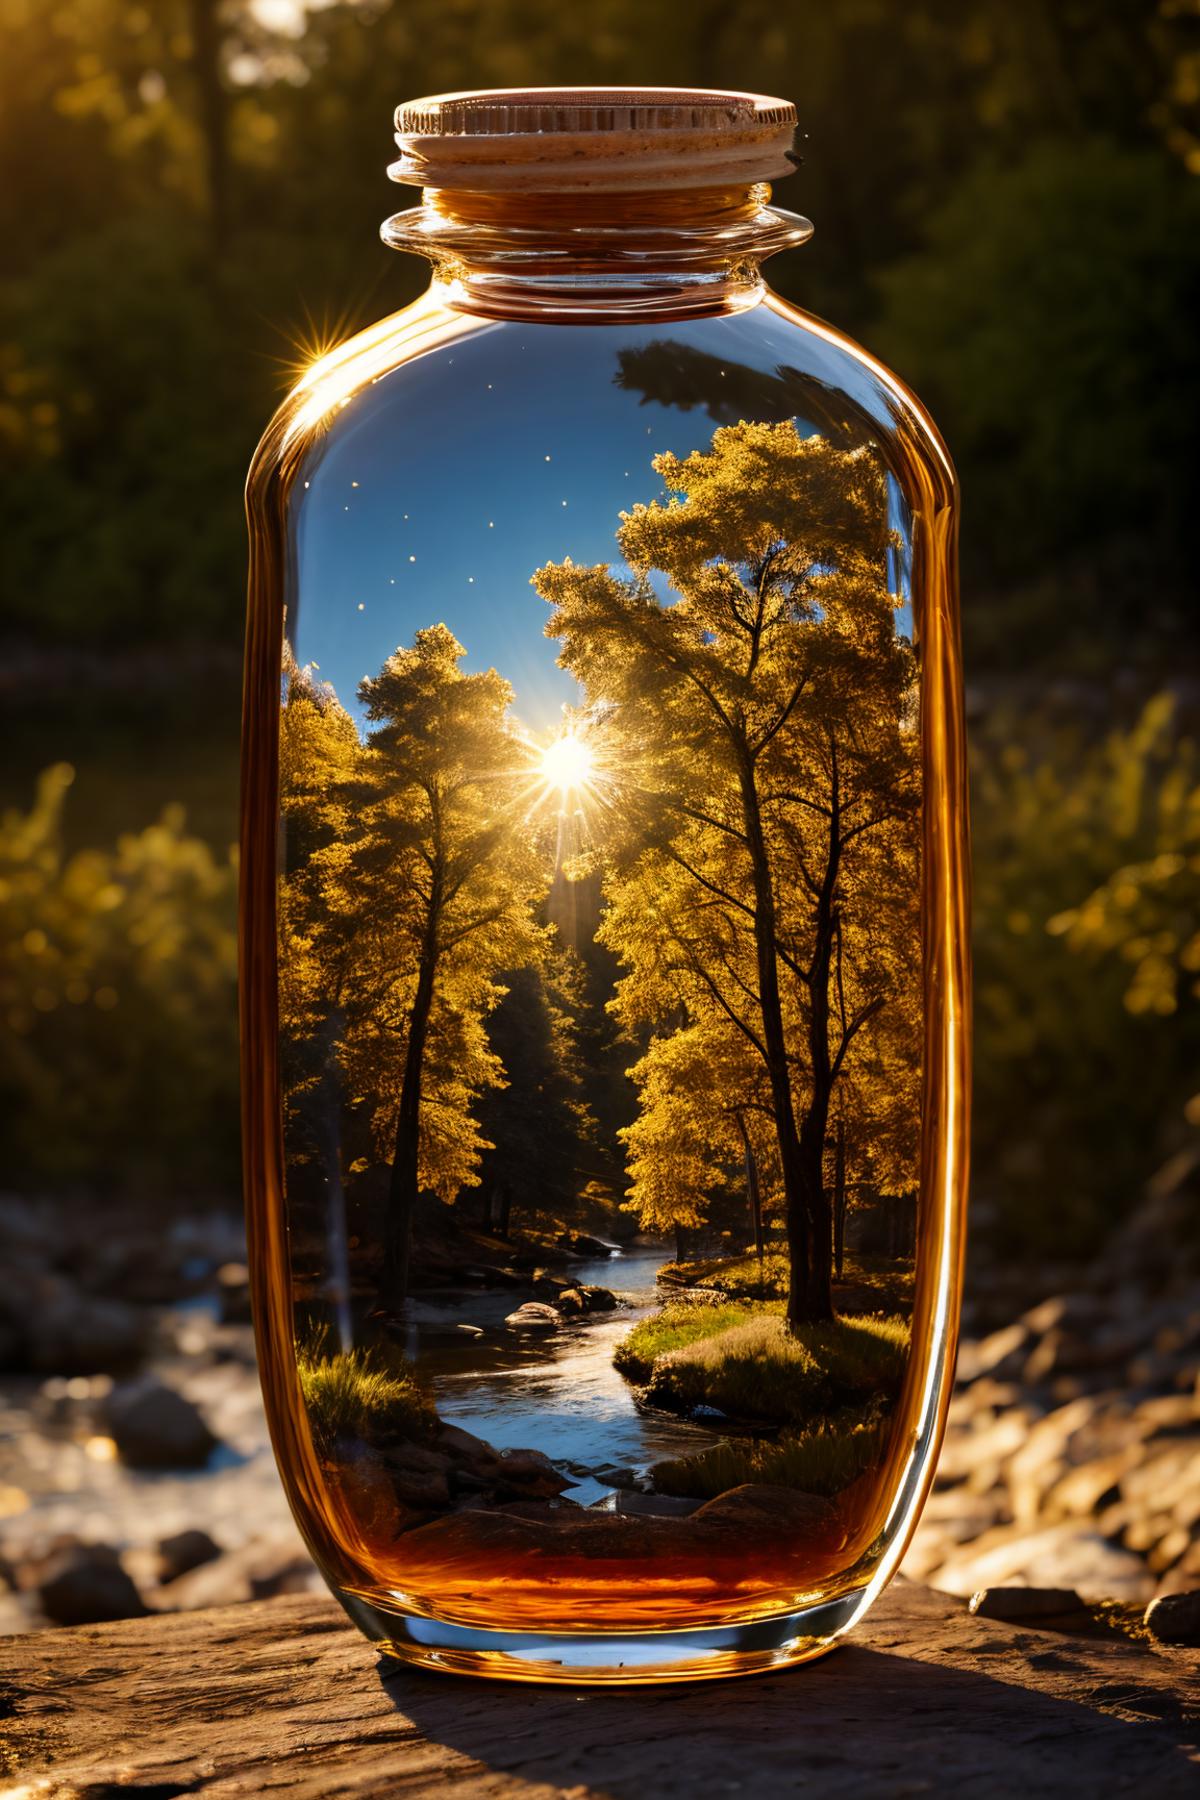 A mirror with a forest and a beautiful stream in the background.